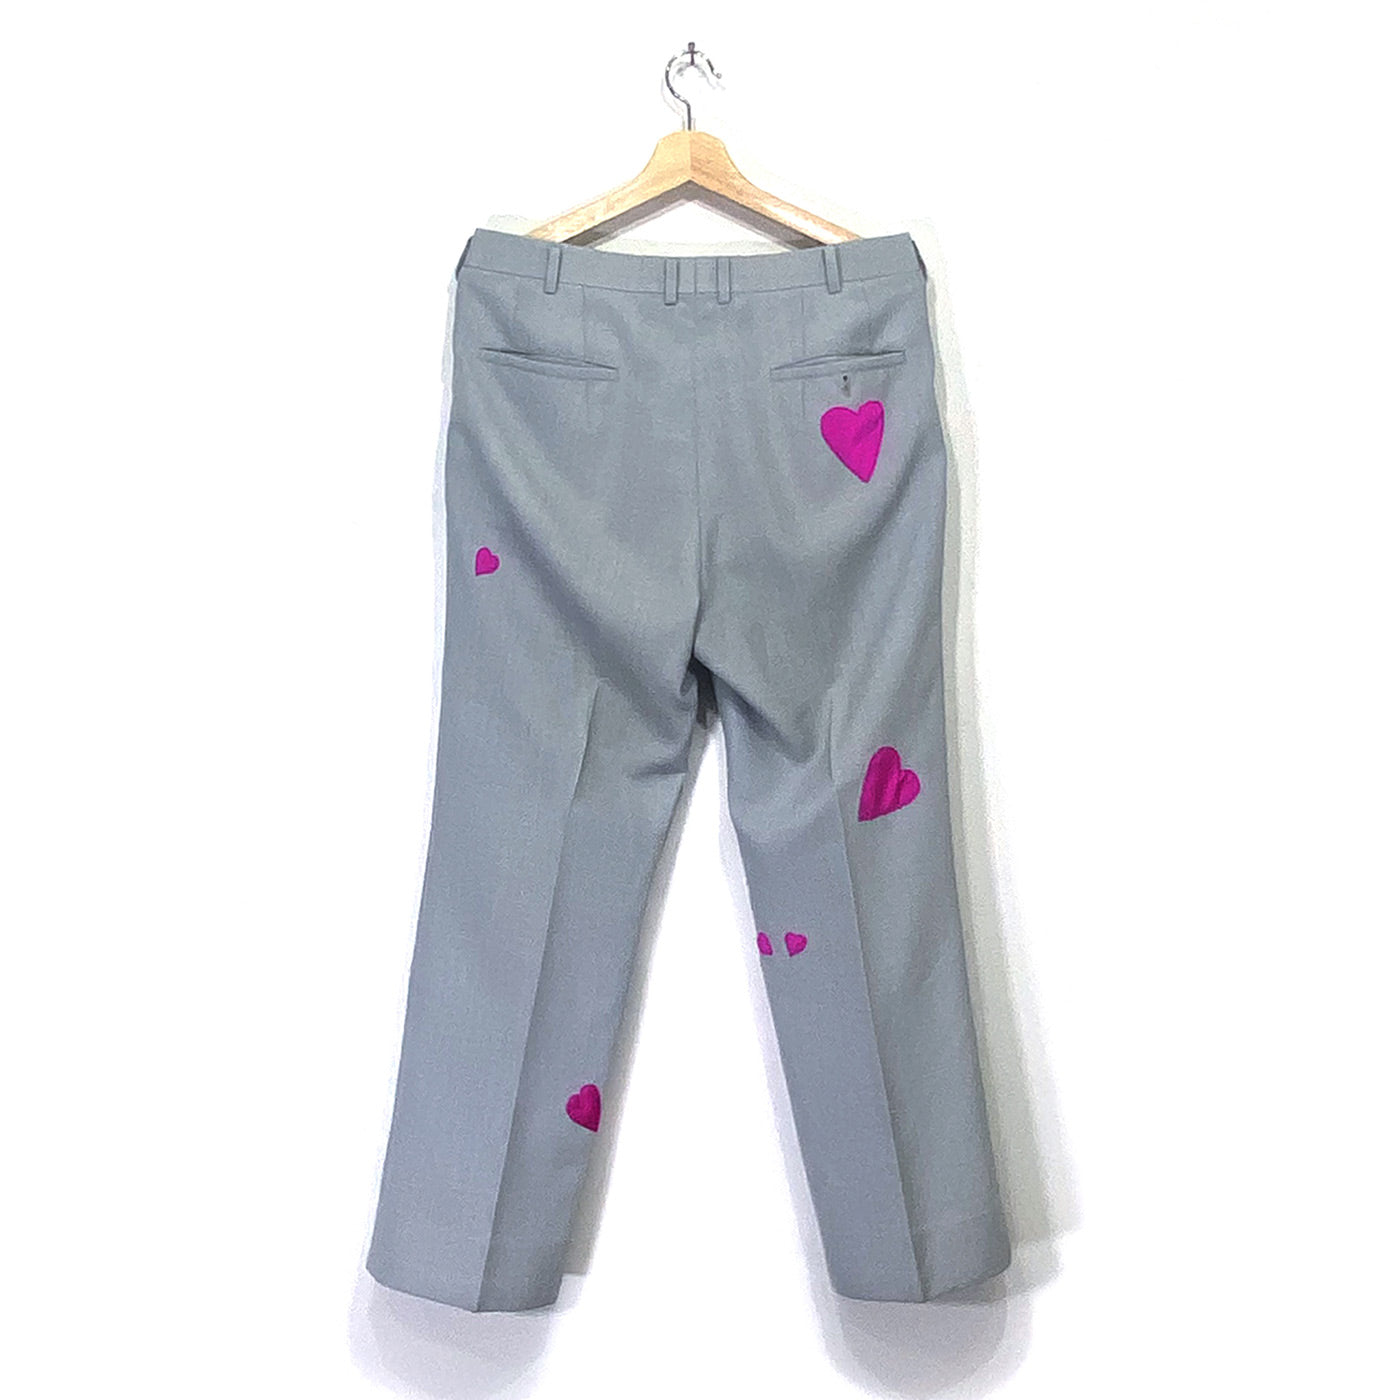 The back side of light grey trousers with several differently sized pink hearts sewn on